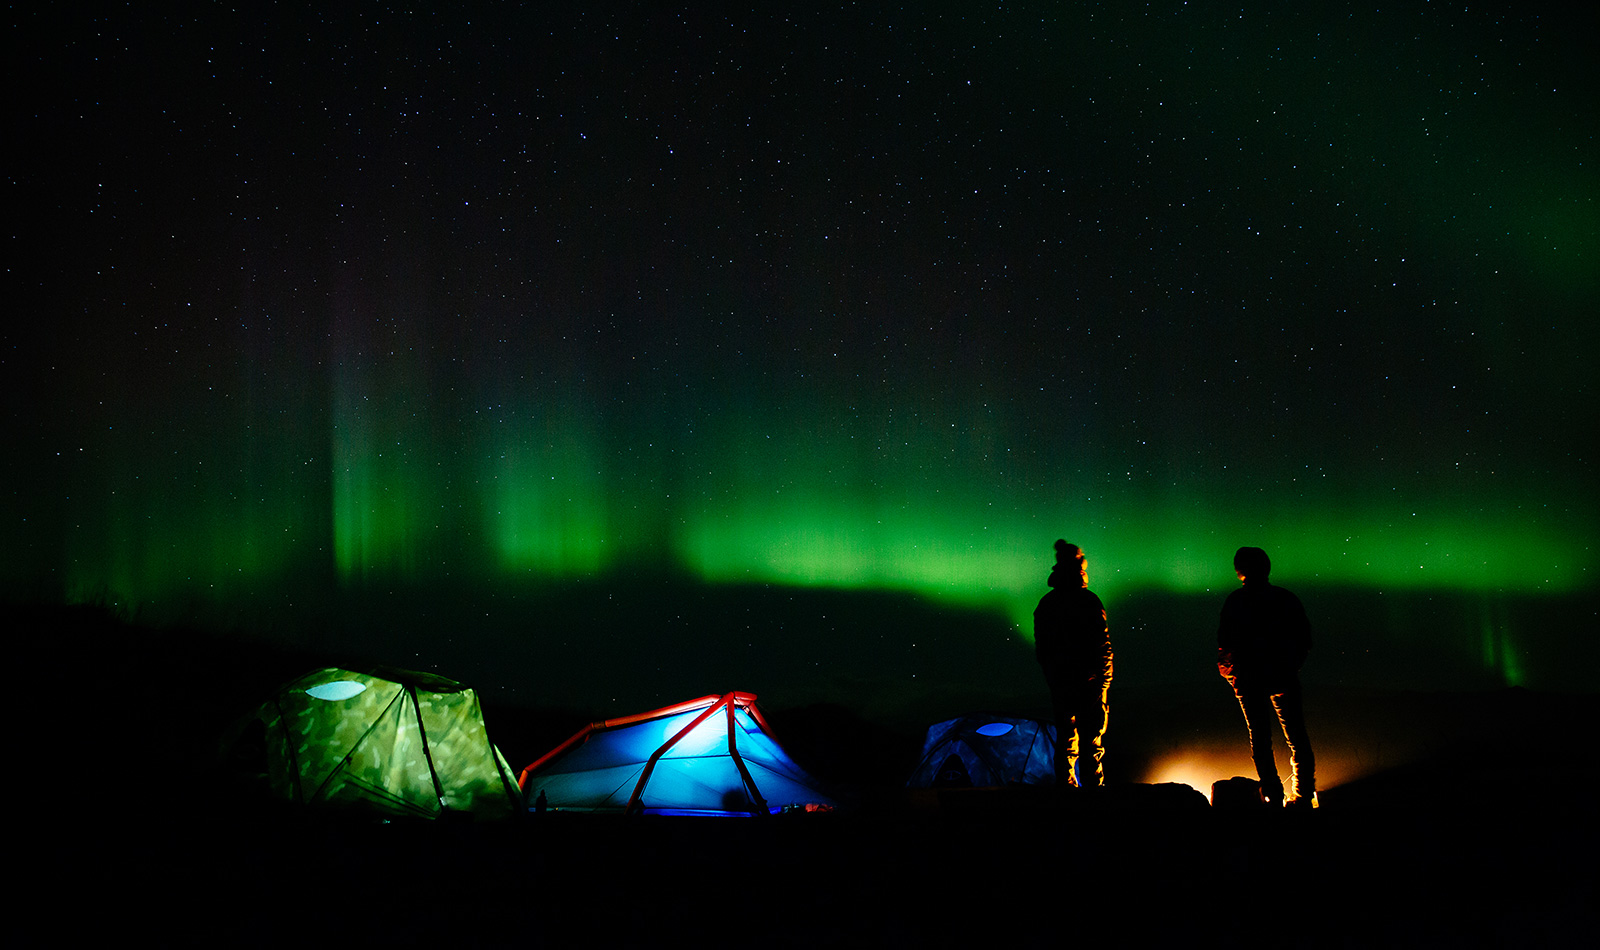 Camping under the Northern Lights. Photo by James Bowden